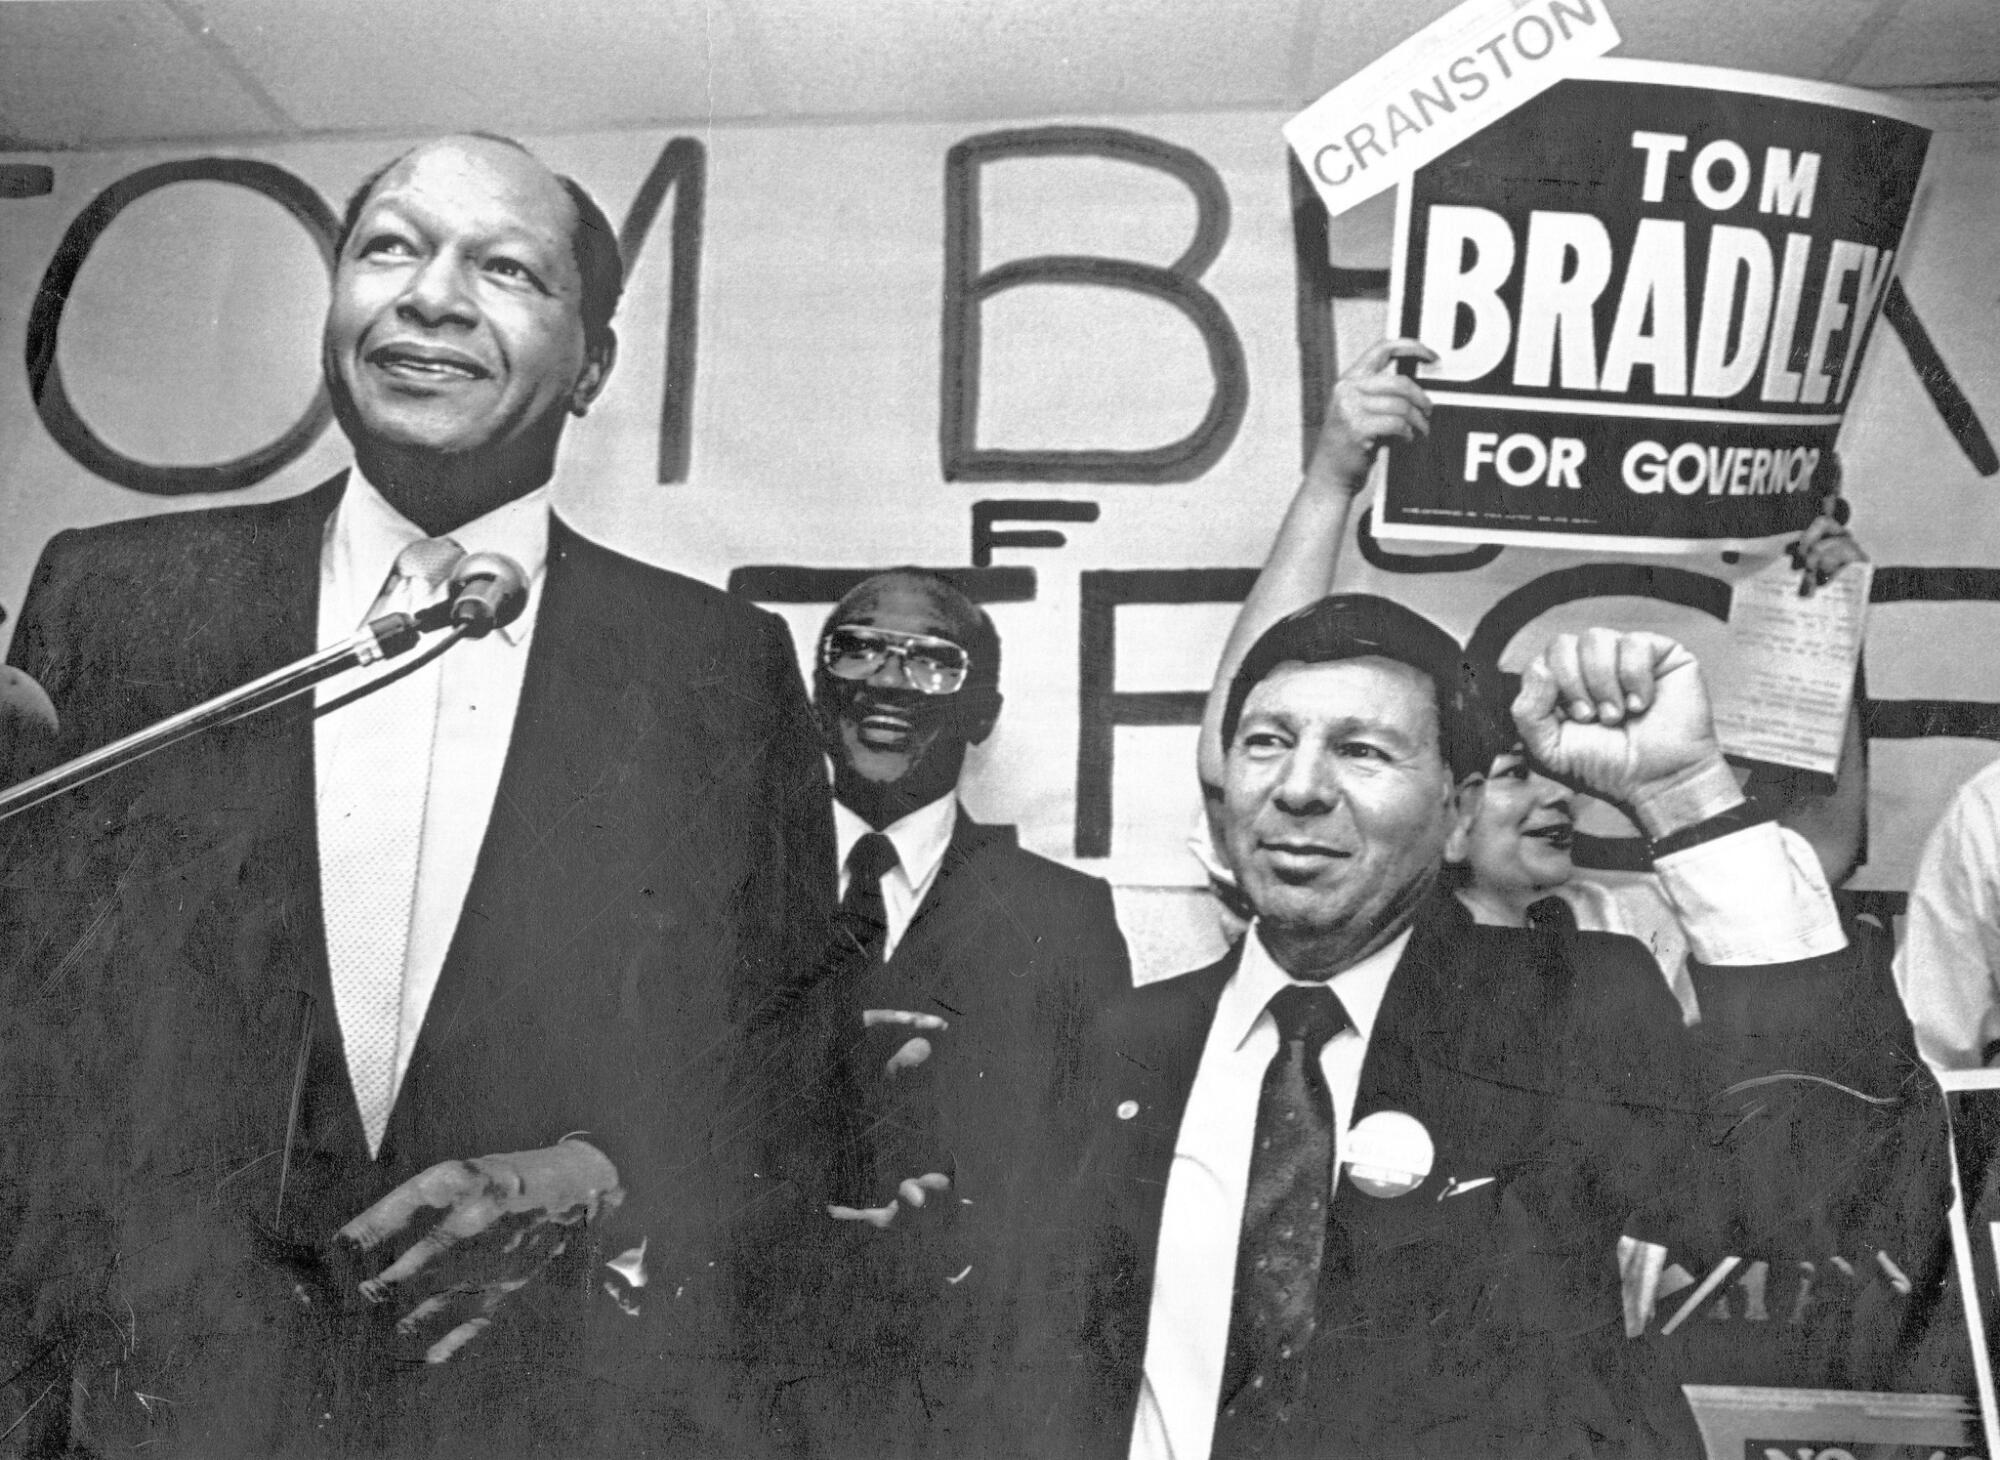 Los Angeles Mayor Tom Bradley during his run for governor in 1986, when Proposition 65 was also on the ballot.